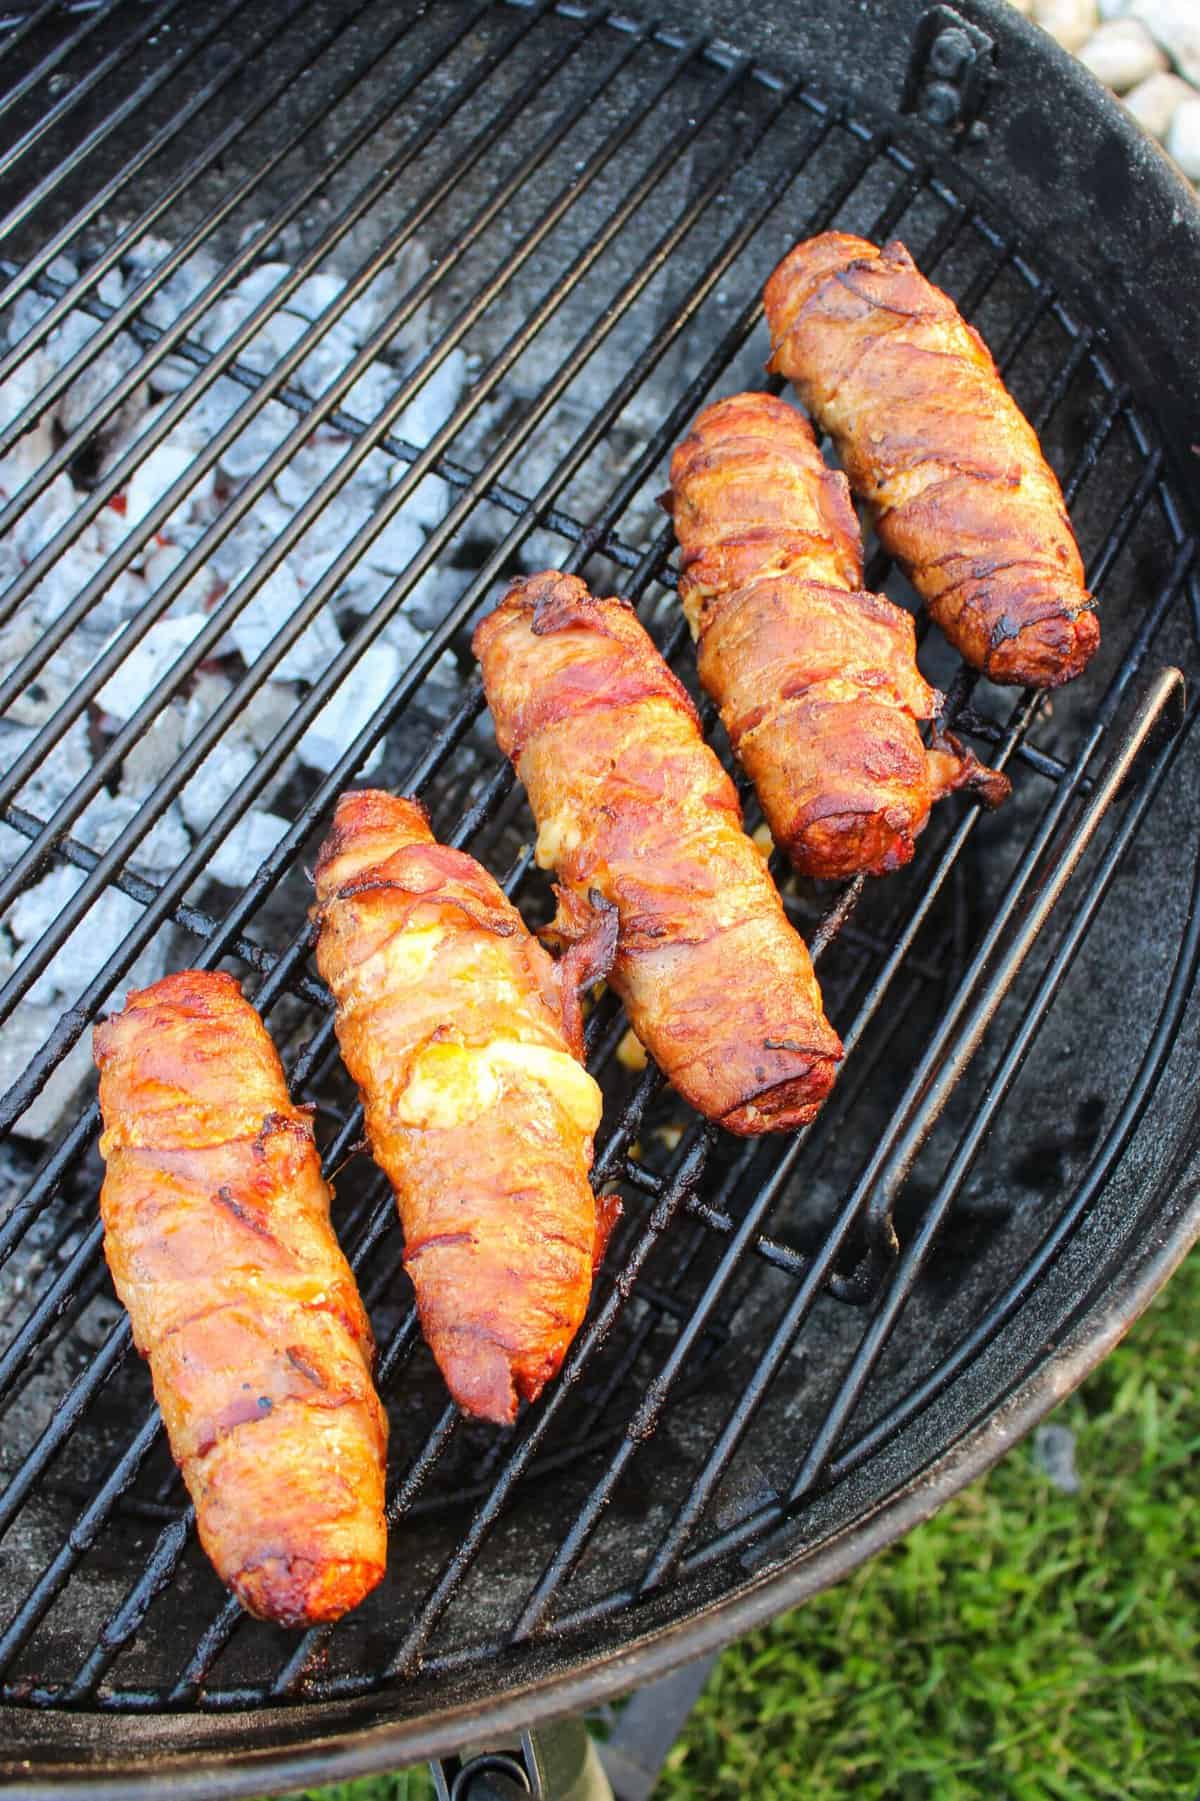 cooked bacon wrap hot dogs on a grill overhead